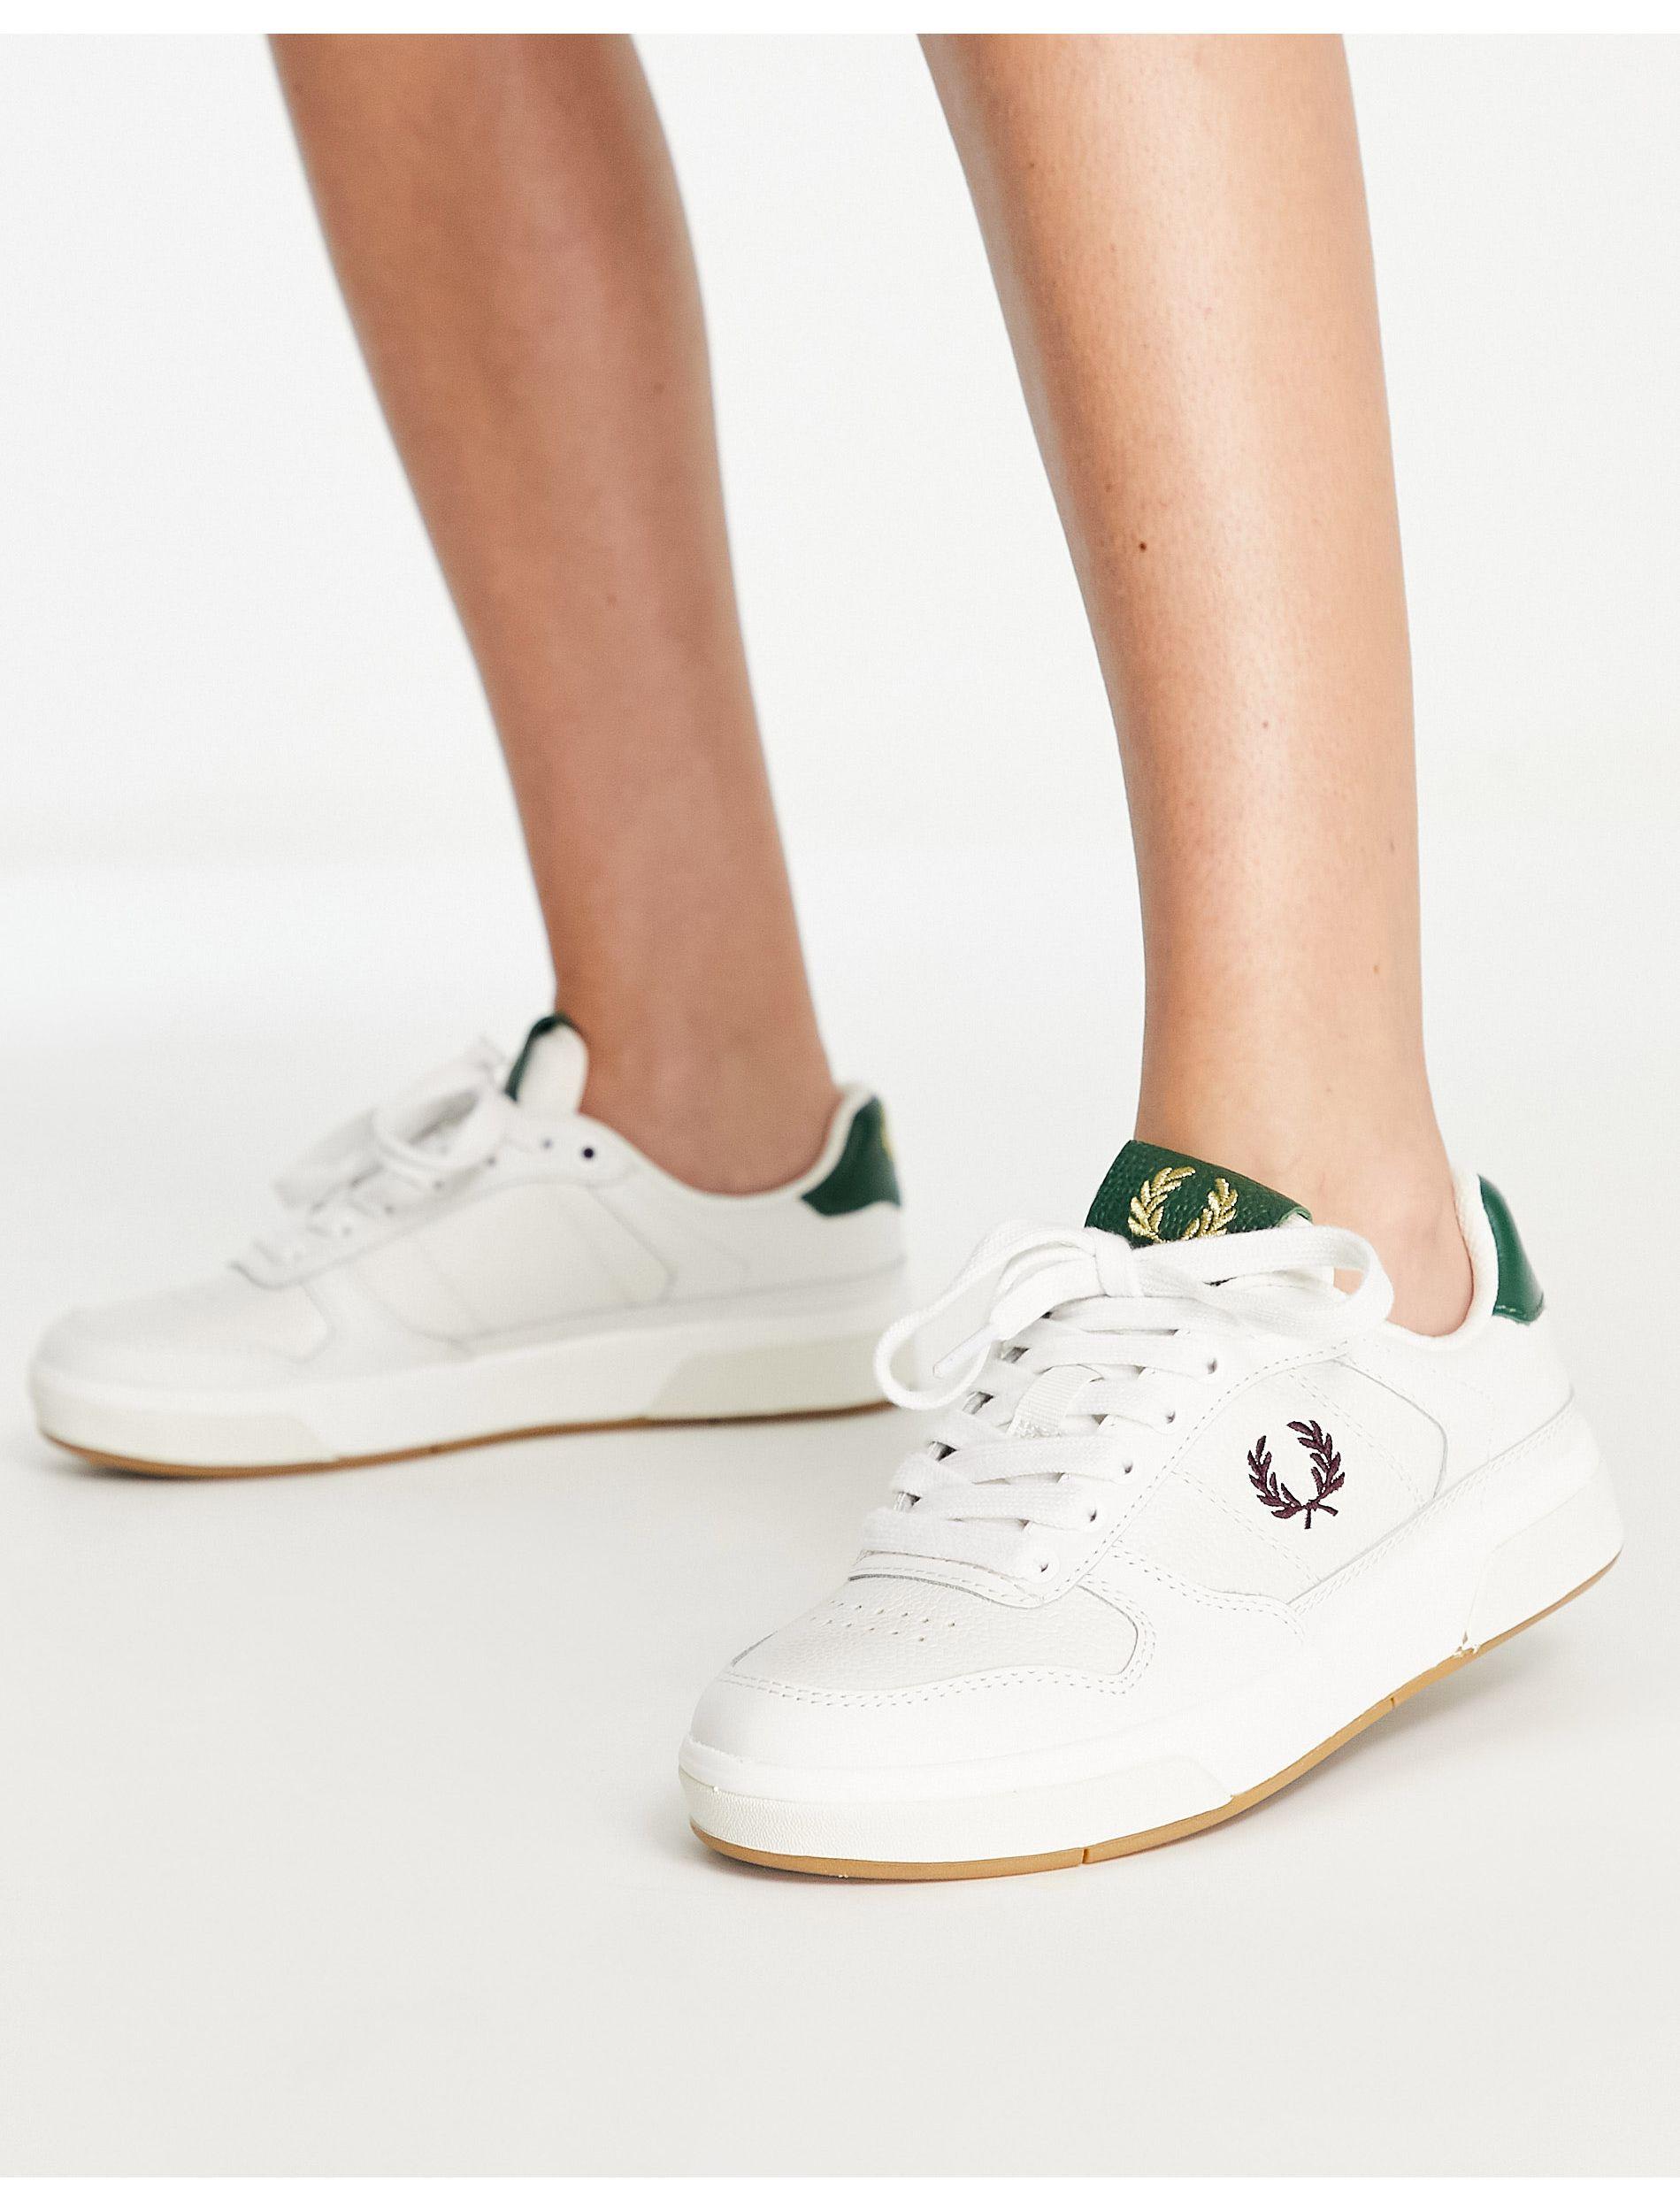 Fred Perry Scotch Grain Leather Trainers in White | Lyst Australia